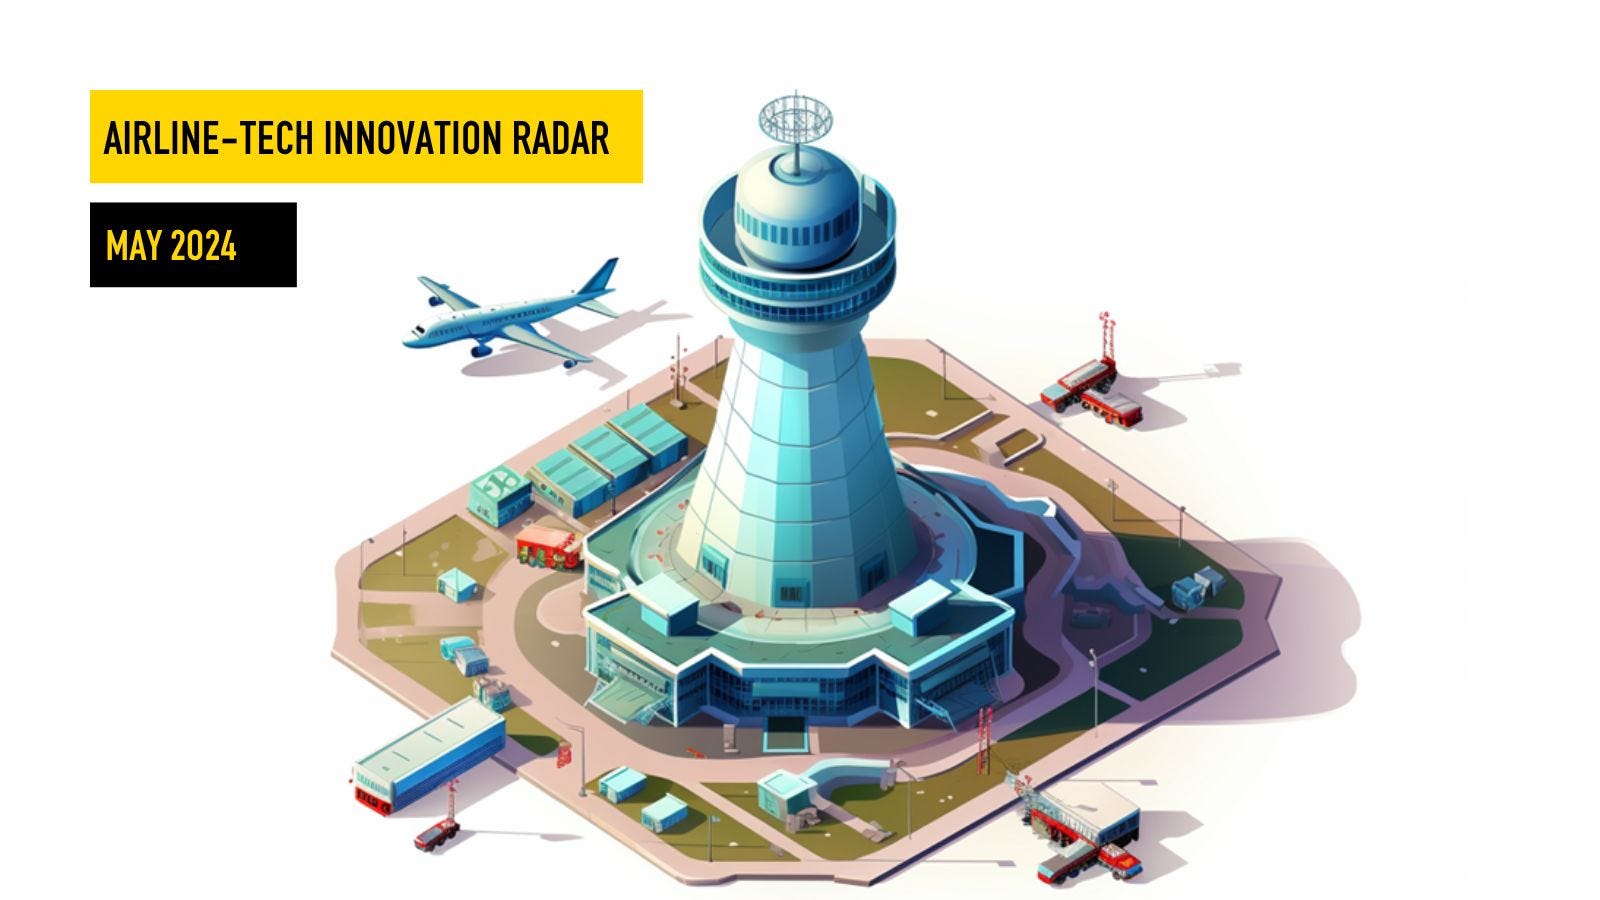 Our Top 3 Airline-Tech Innovations From May 2024